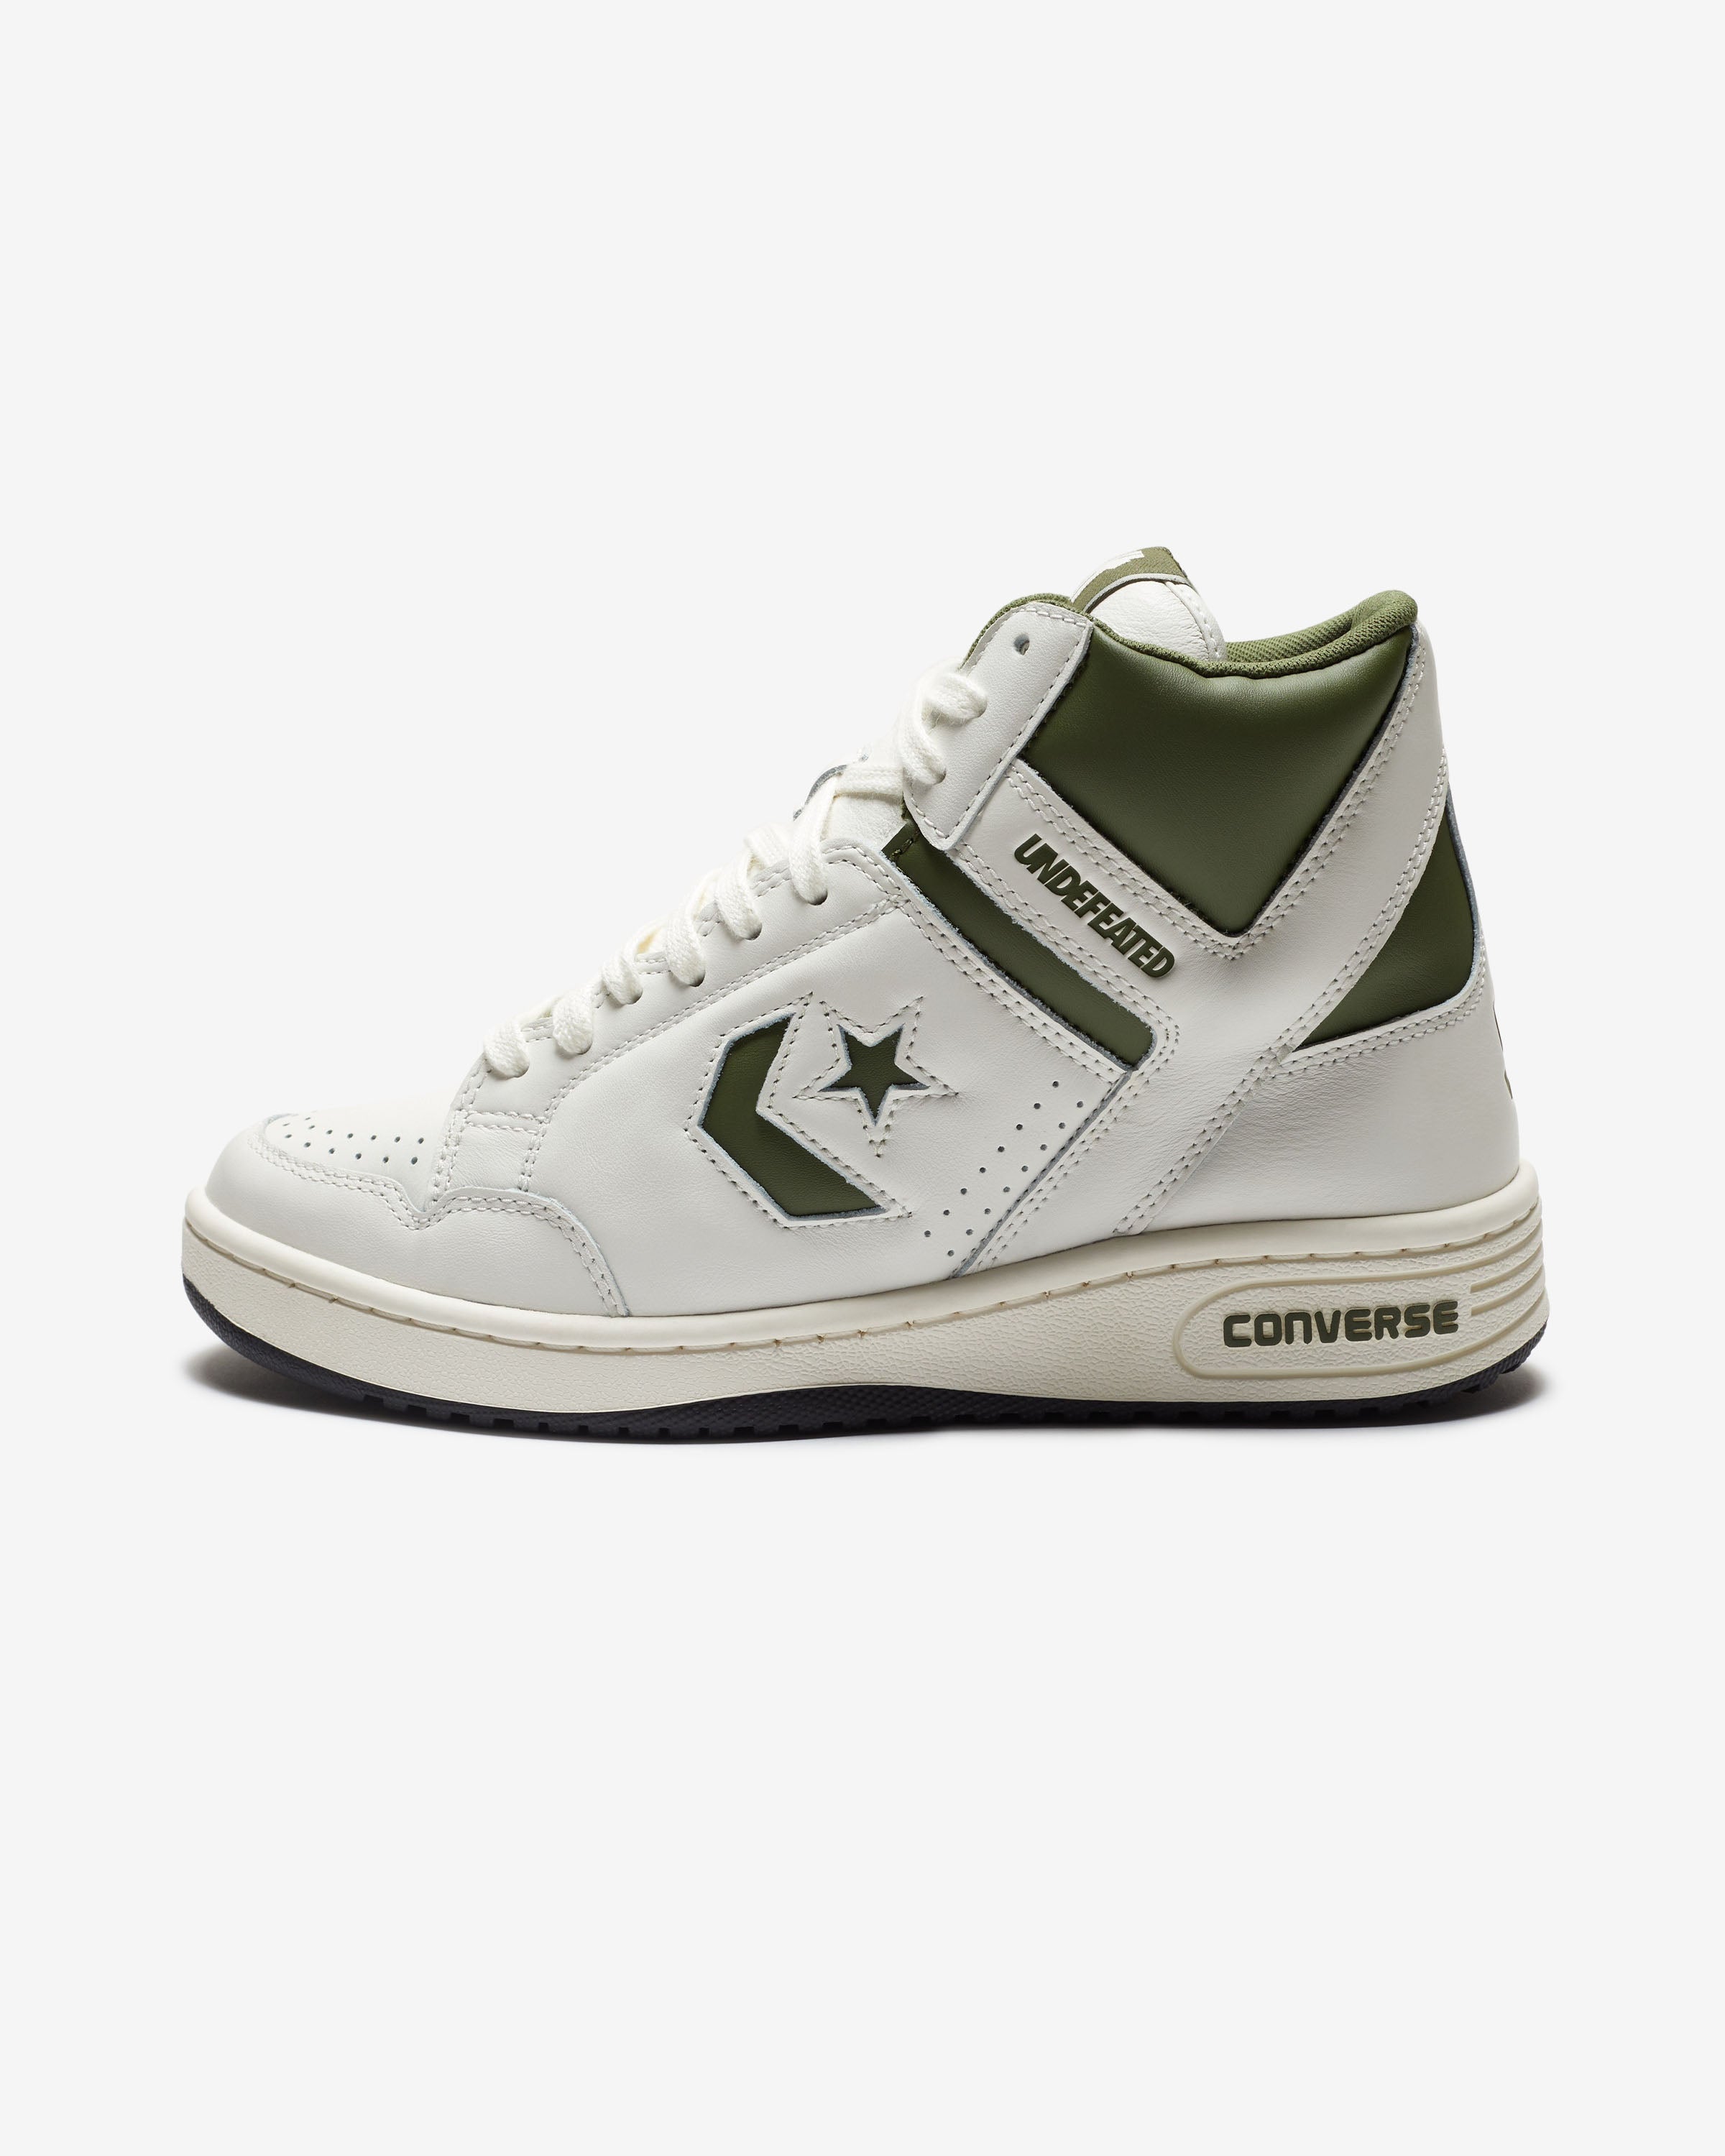 UNDEFEATED X CONVERSE WEAPON MID - VINTAGEWHITE/ CHIVE